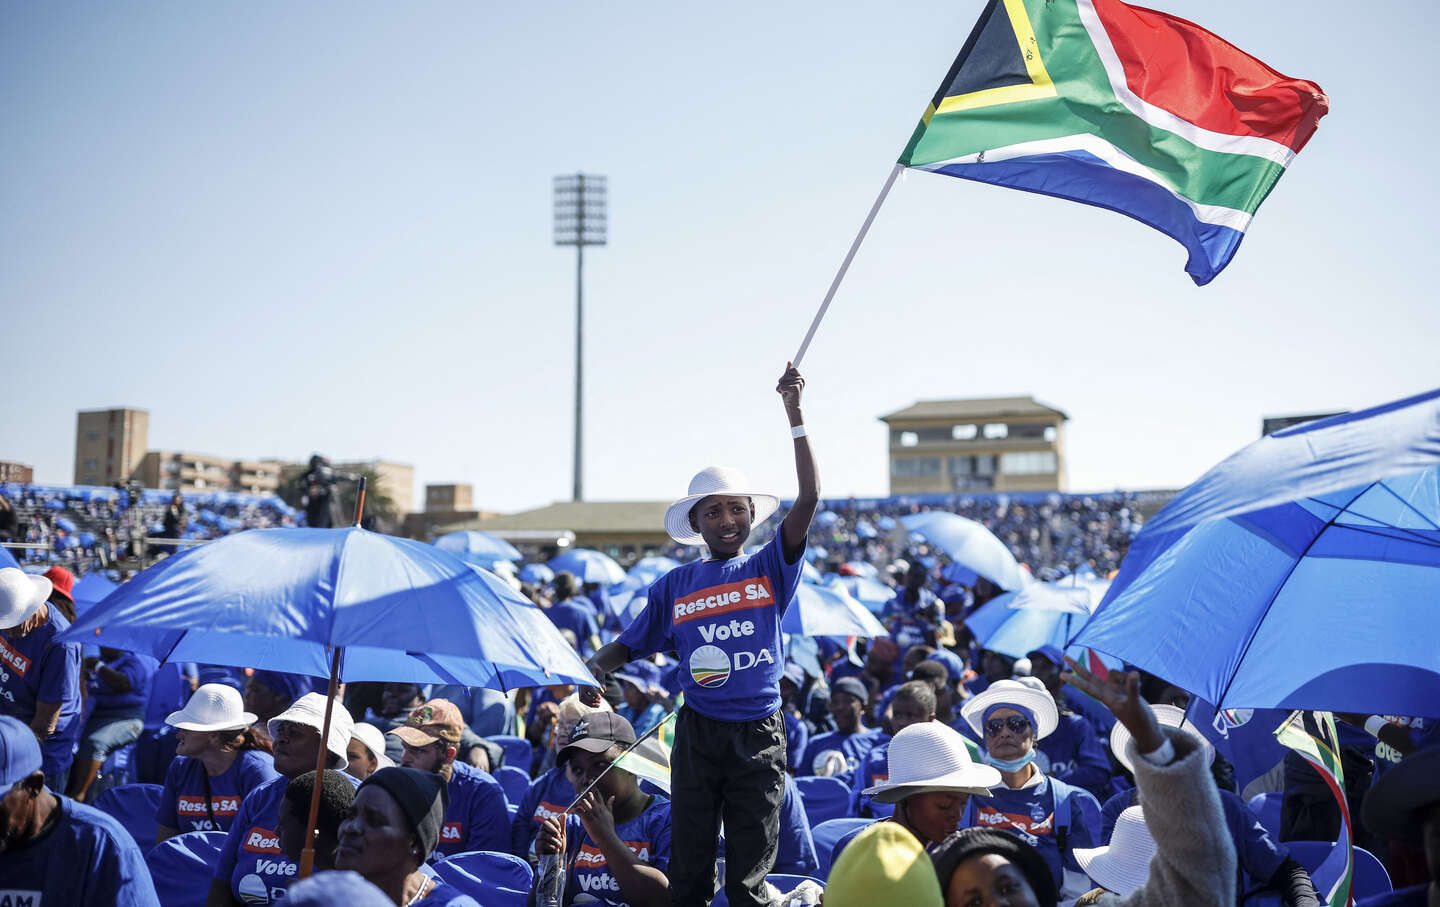 A person waves a South African flag during the DA’s final rally in Benoni on May 26, 2024, ahead of the South African elections scheduled for May 29, 2024.